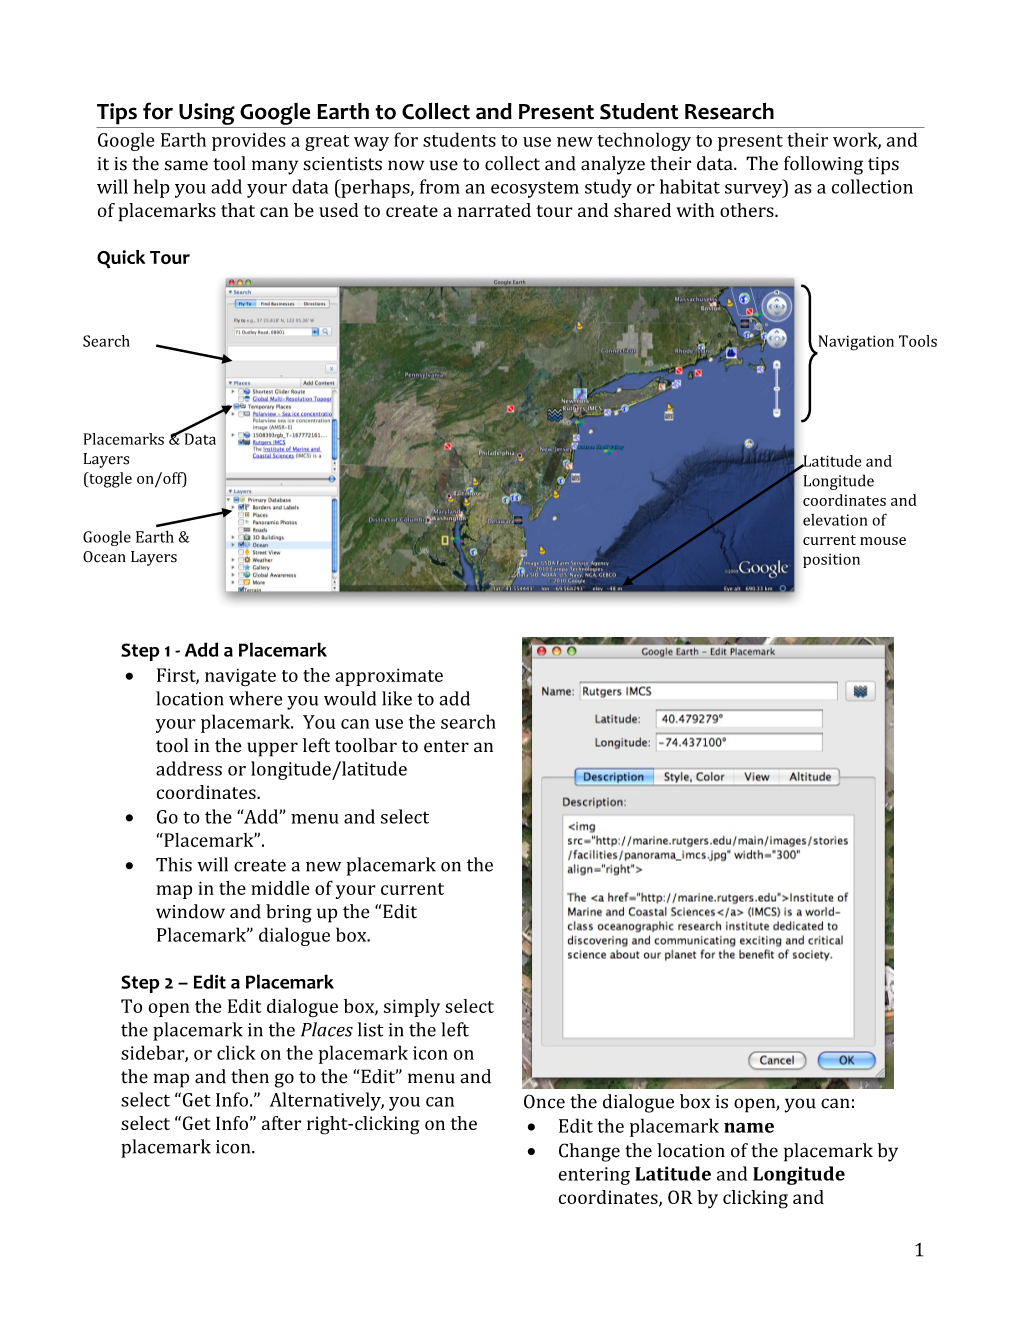 Tips for Using Google Earth to Present Student Research